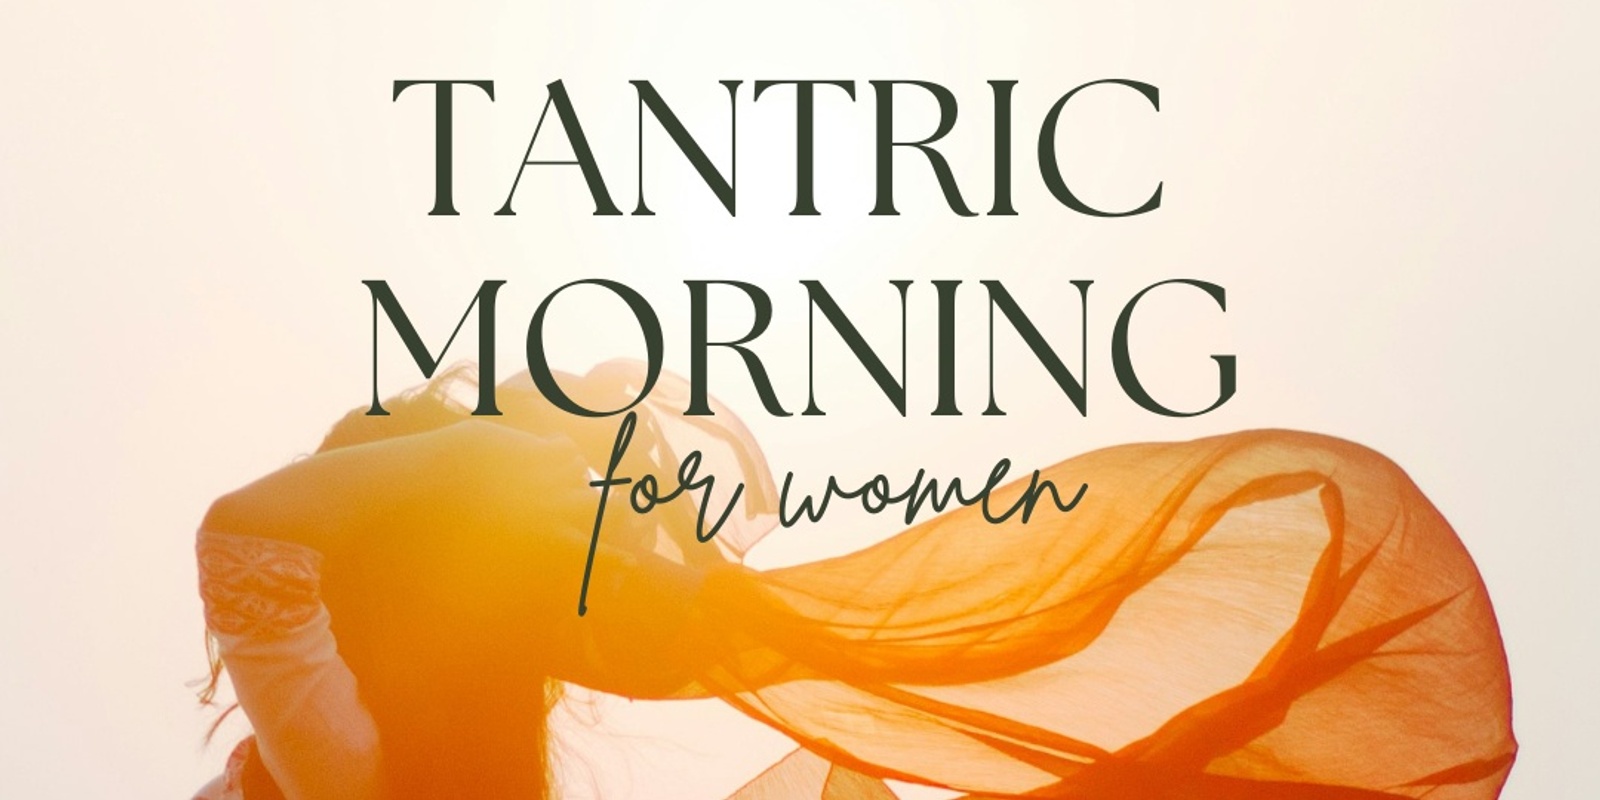 Banner image for Tantric Morning